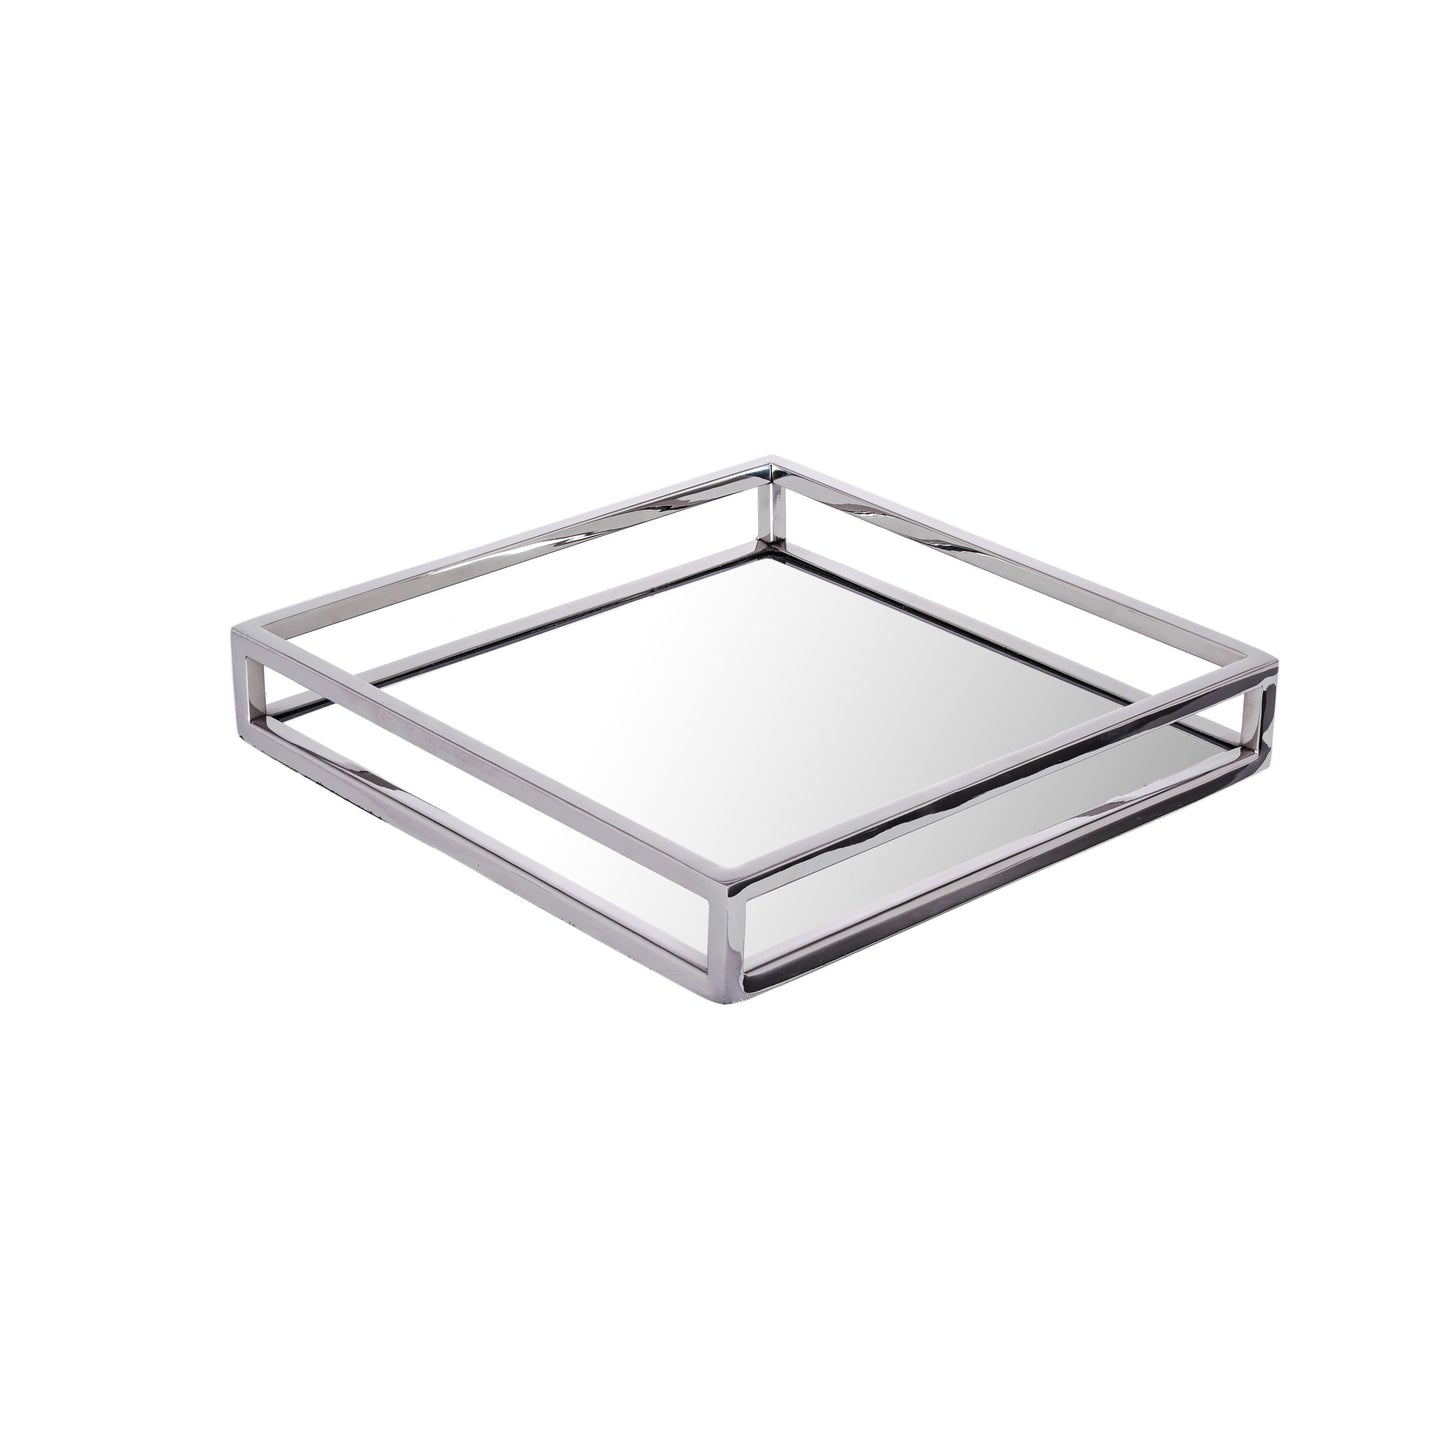 Classic Touch Decor Square Mirror Tray, Silver, Stainless Steel